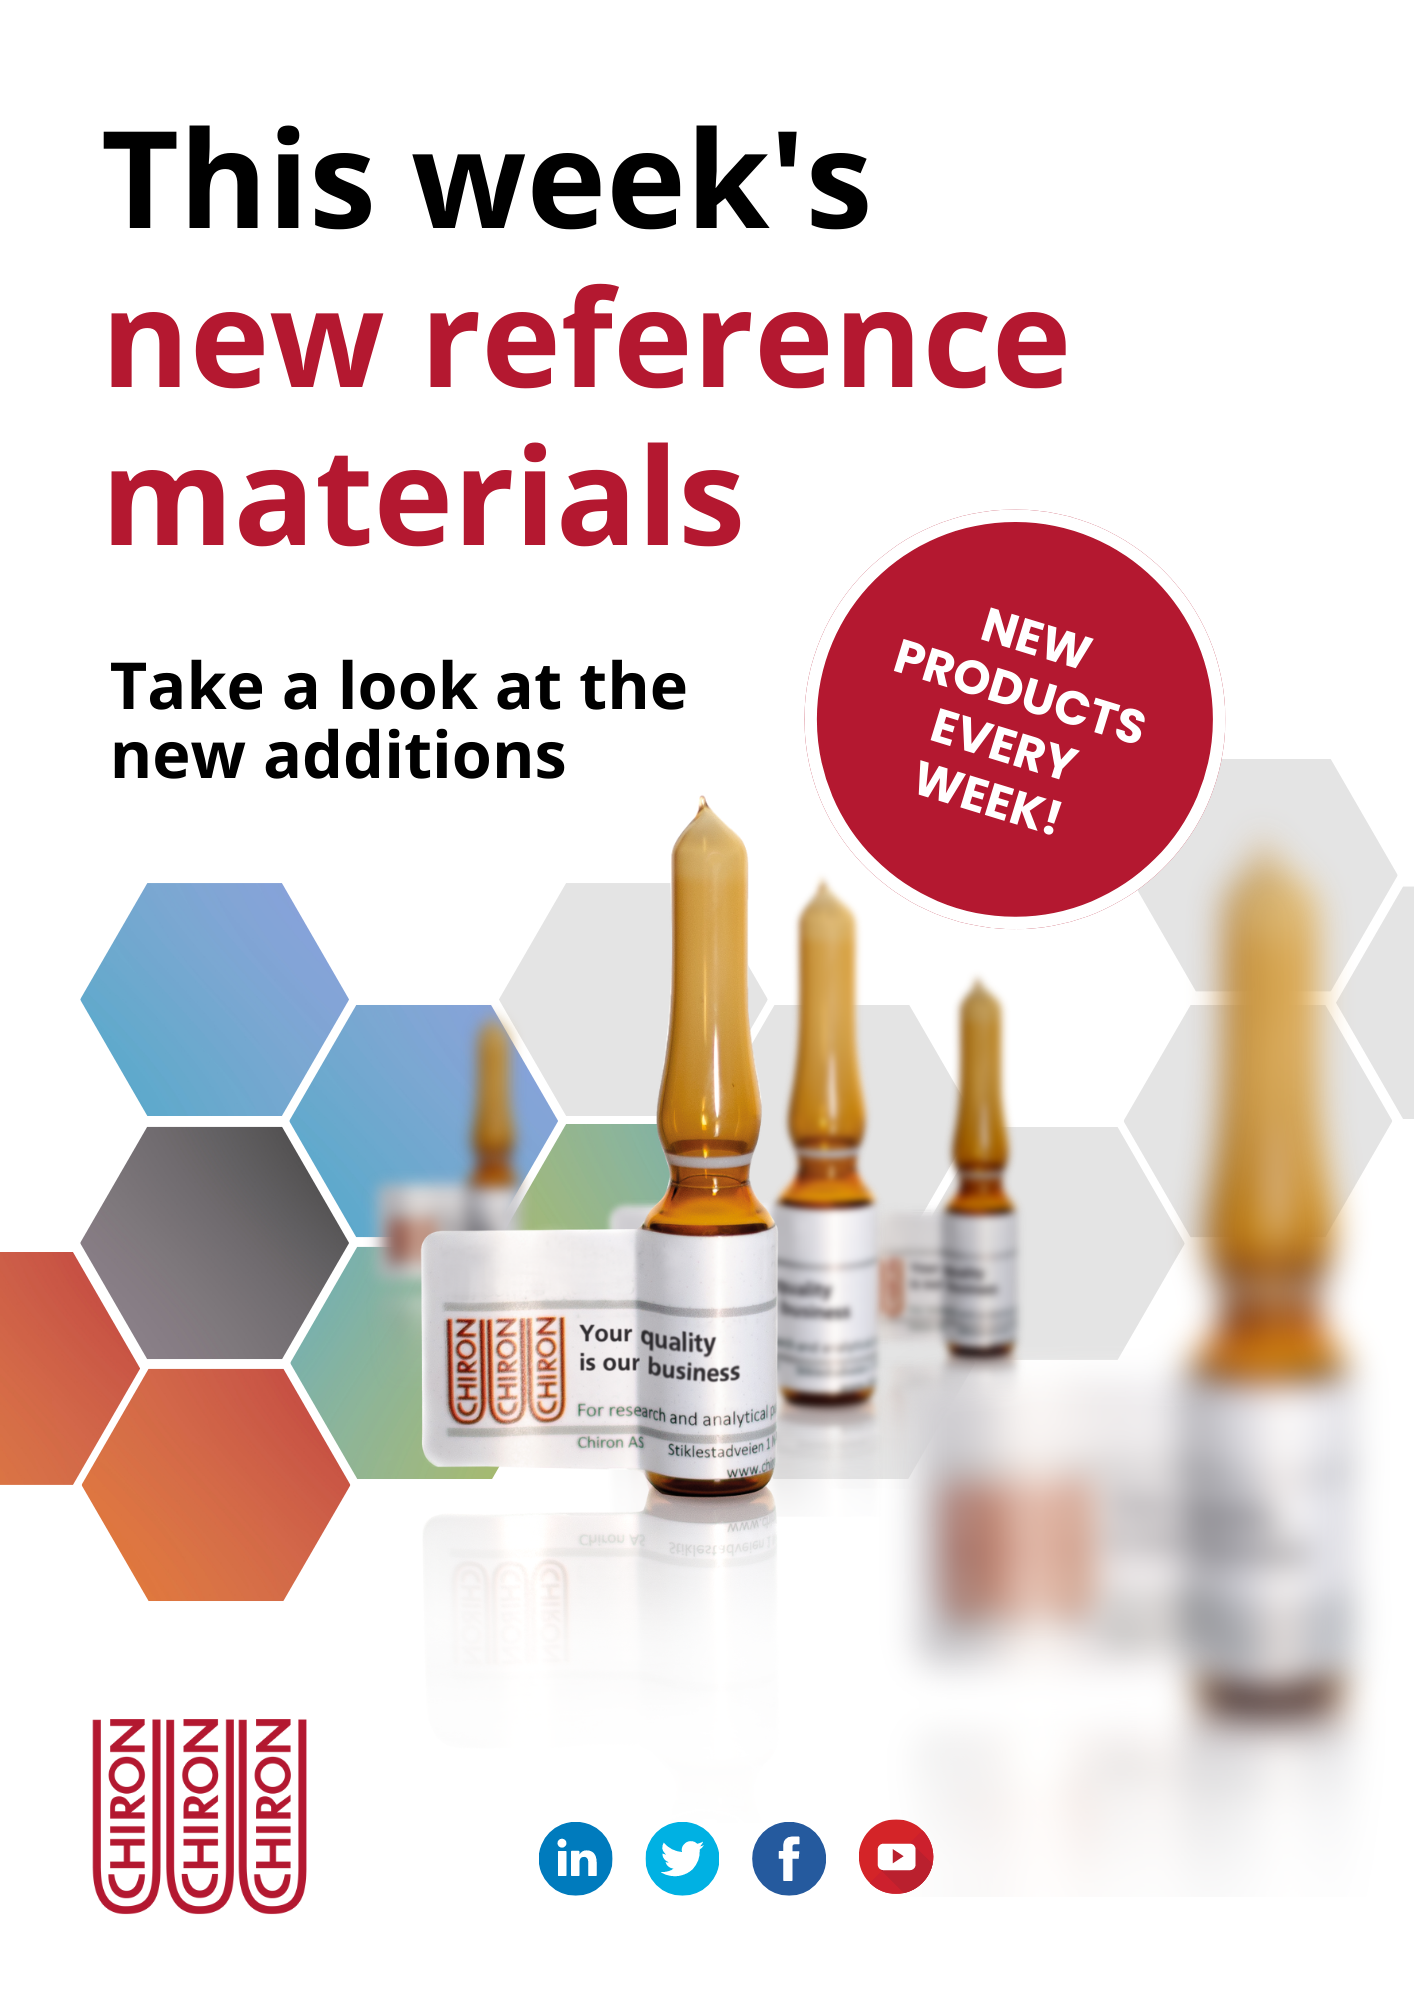 This week's new reference materials | Updated weekly!